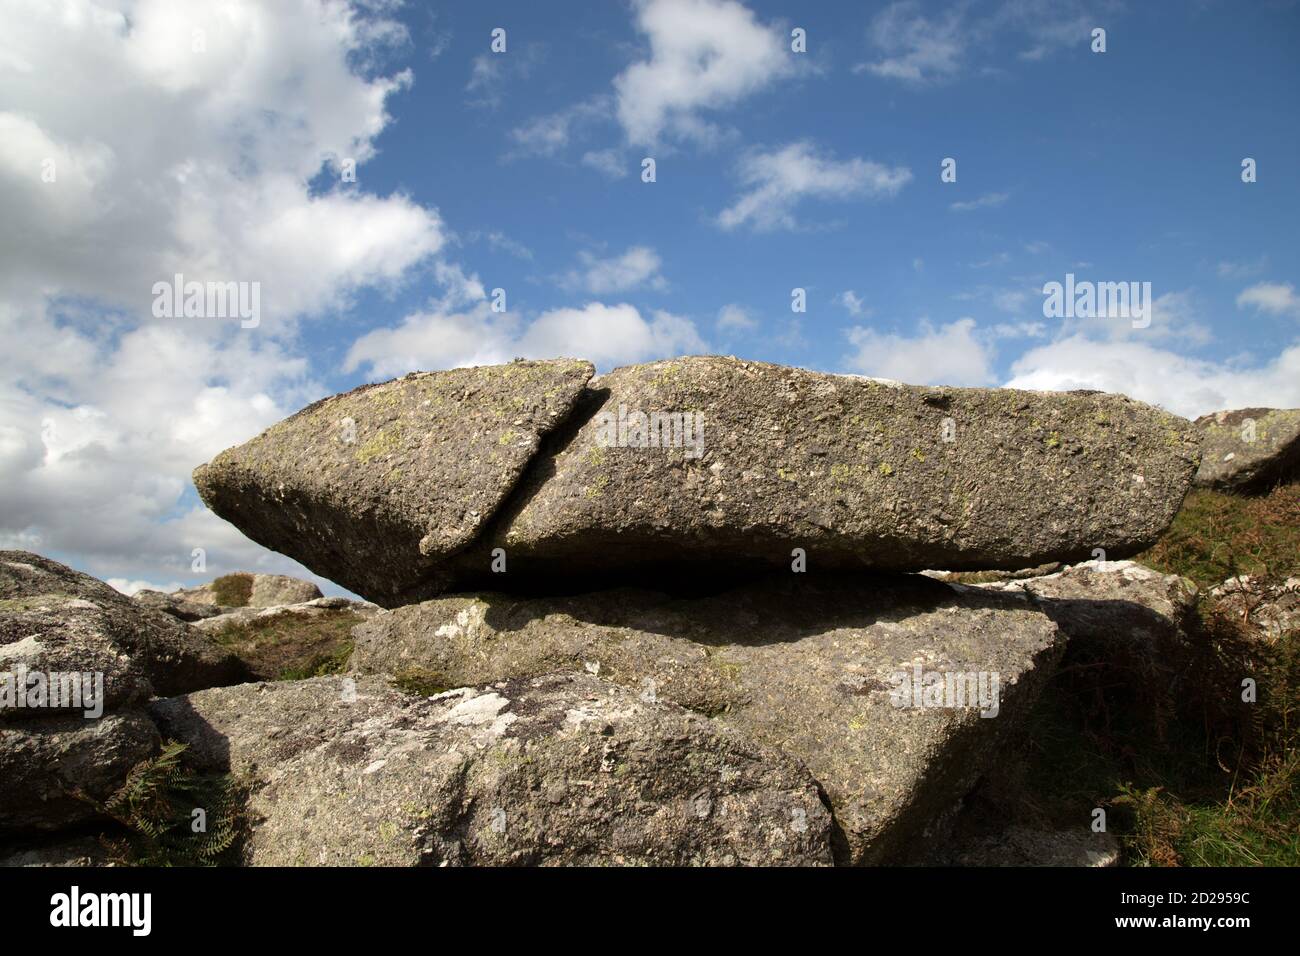 Large lying granite rock with a unique shape against a blue sky and cloudy background. Stock Photo